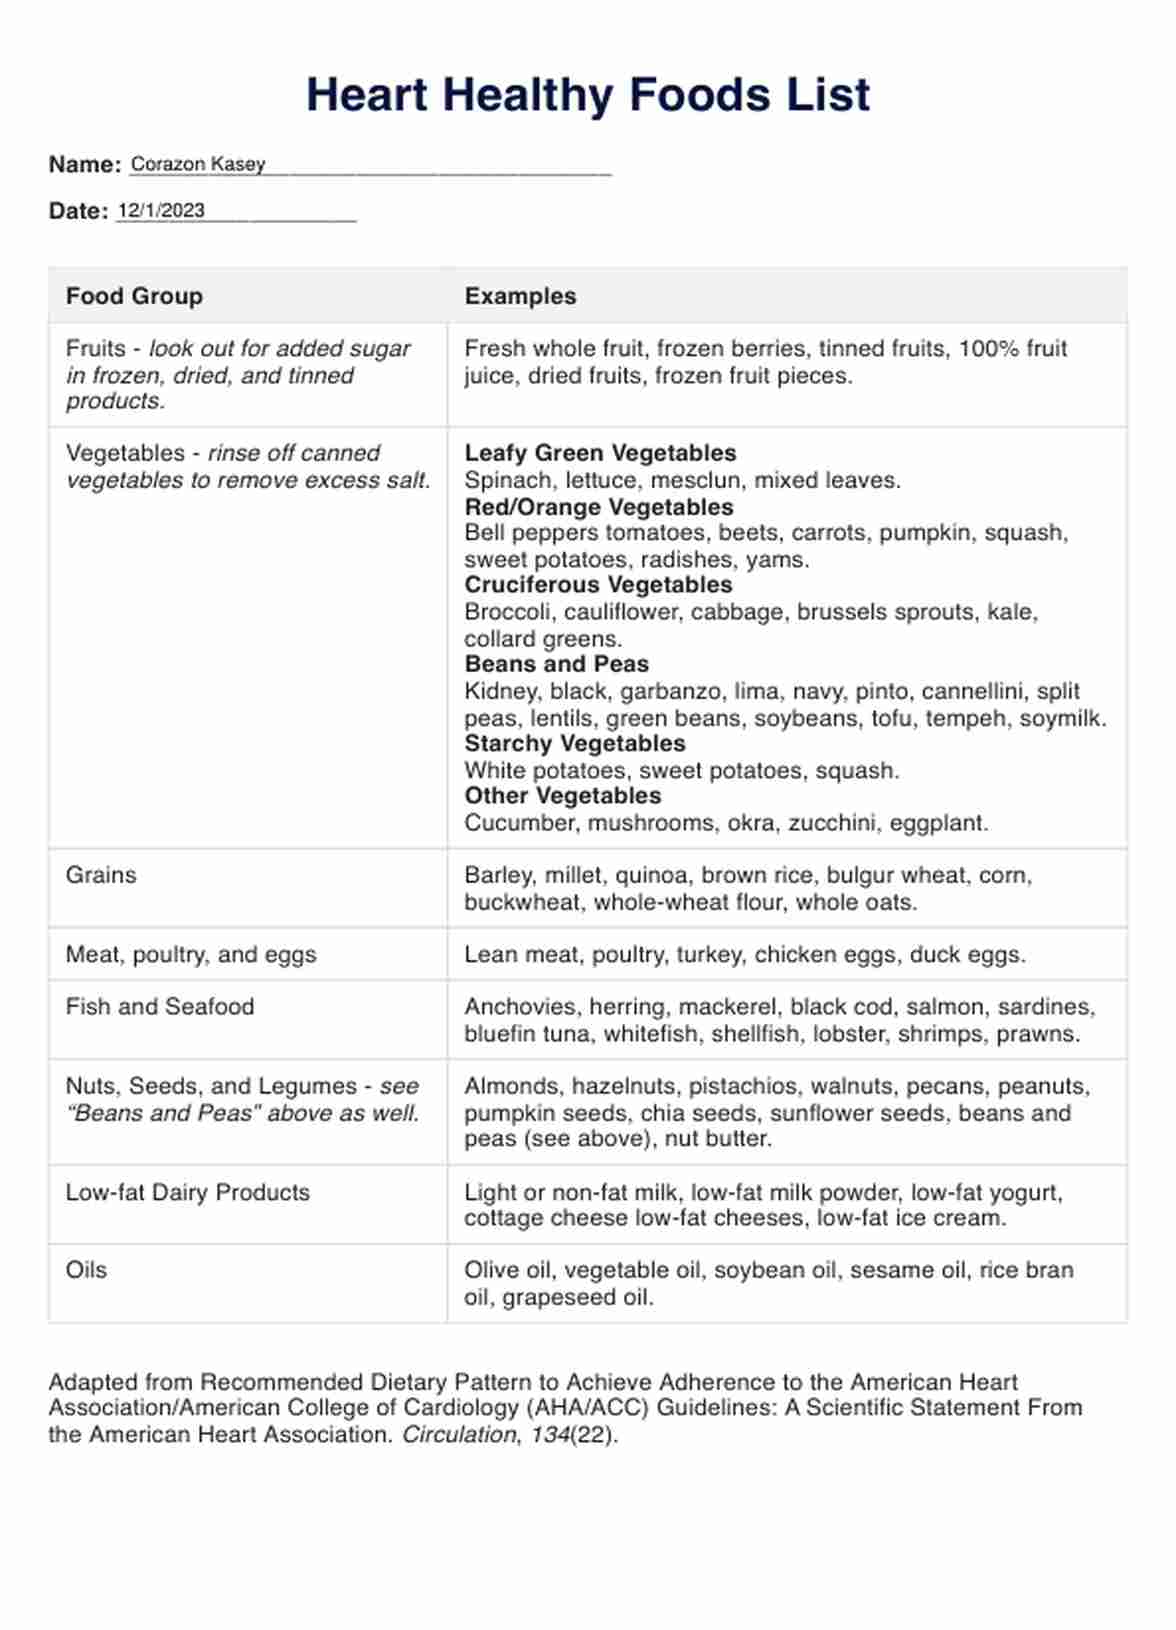  Heart Healthy Foods PDF Example